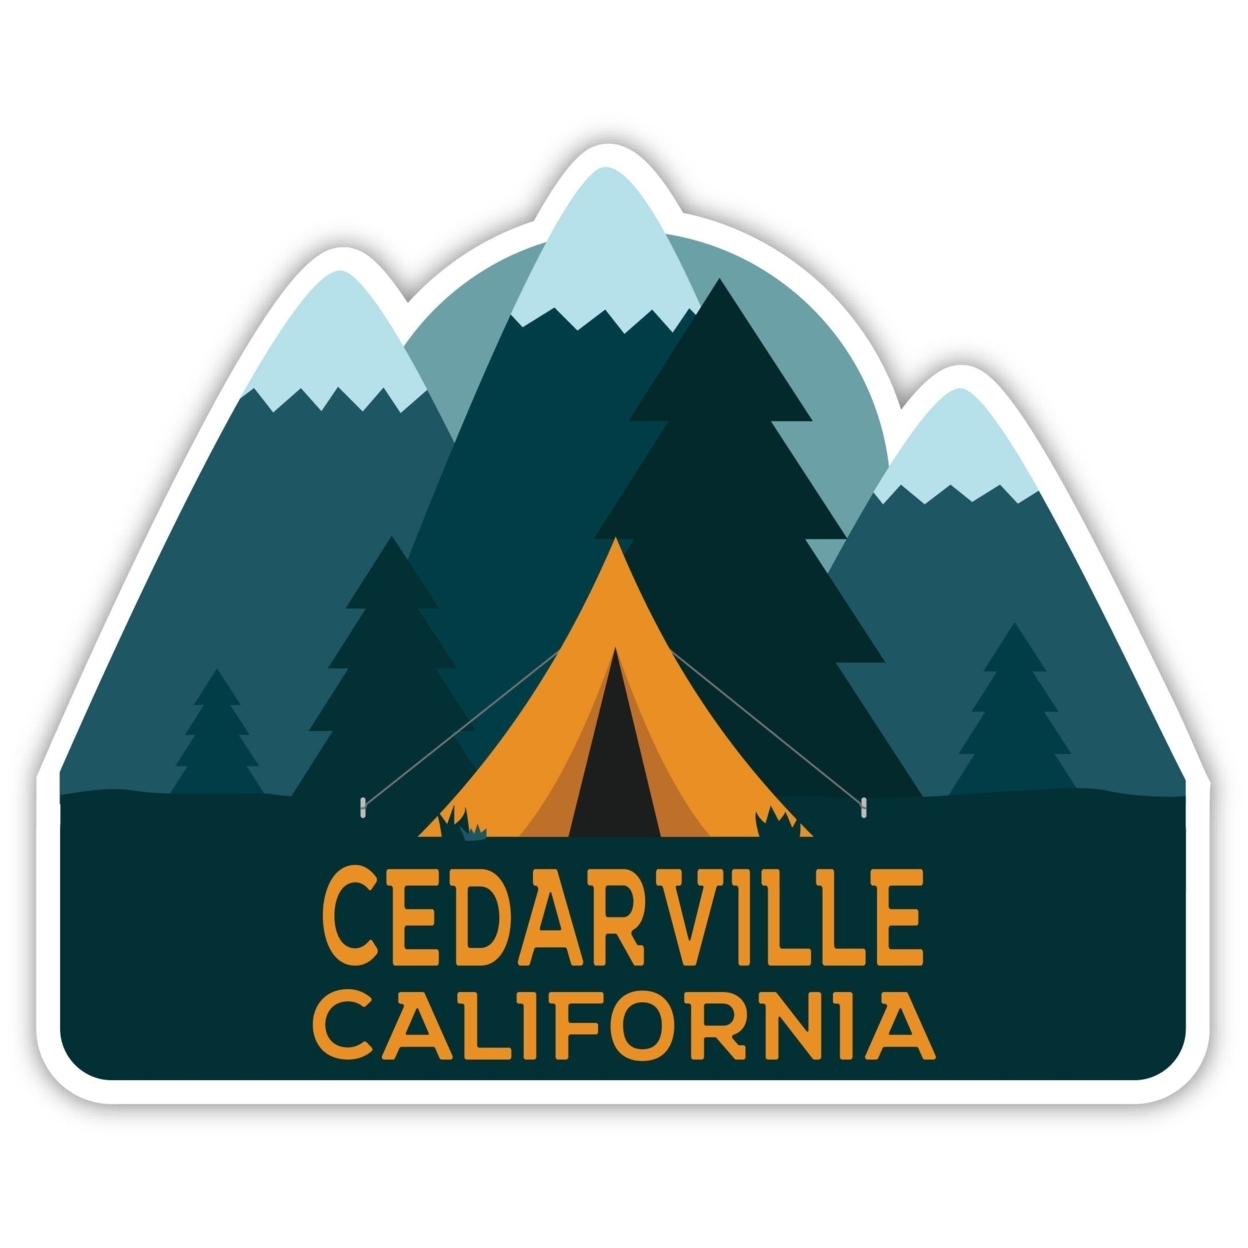 Cedarville California Souvenir Decorative Stickers (Choose Theme And Size) - 4-Pack, 6-Inch, Tent